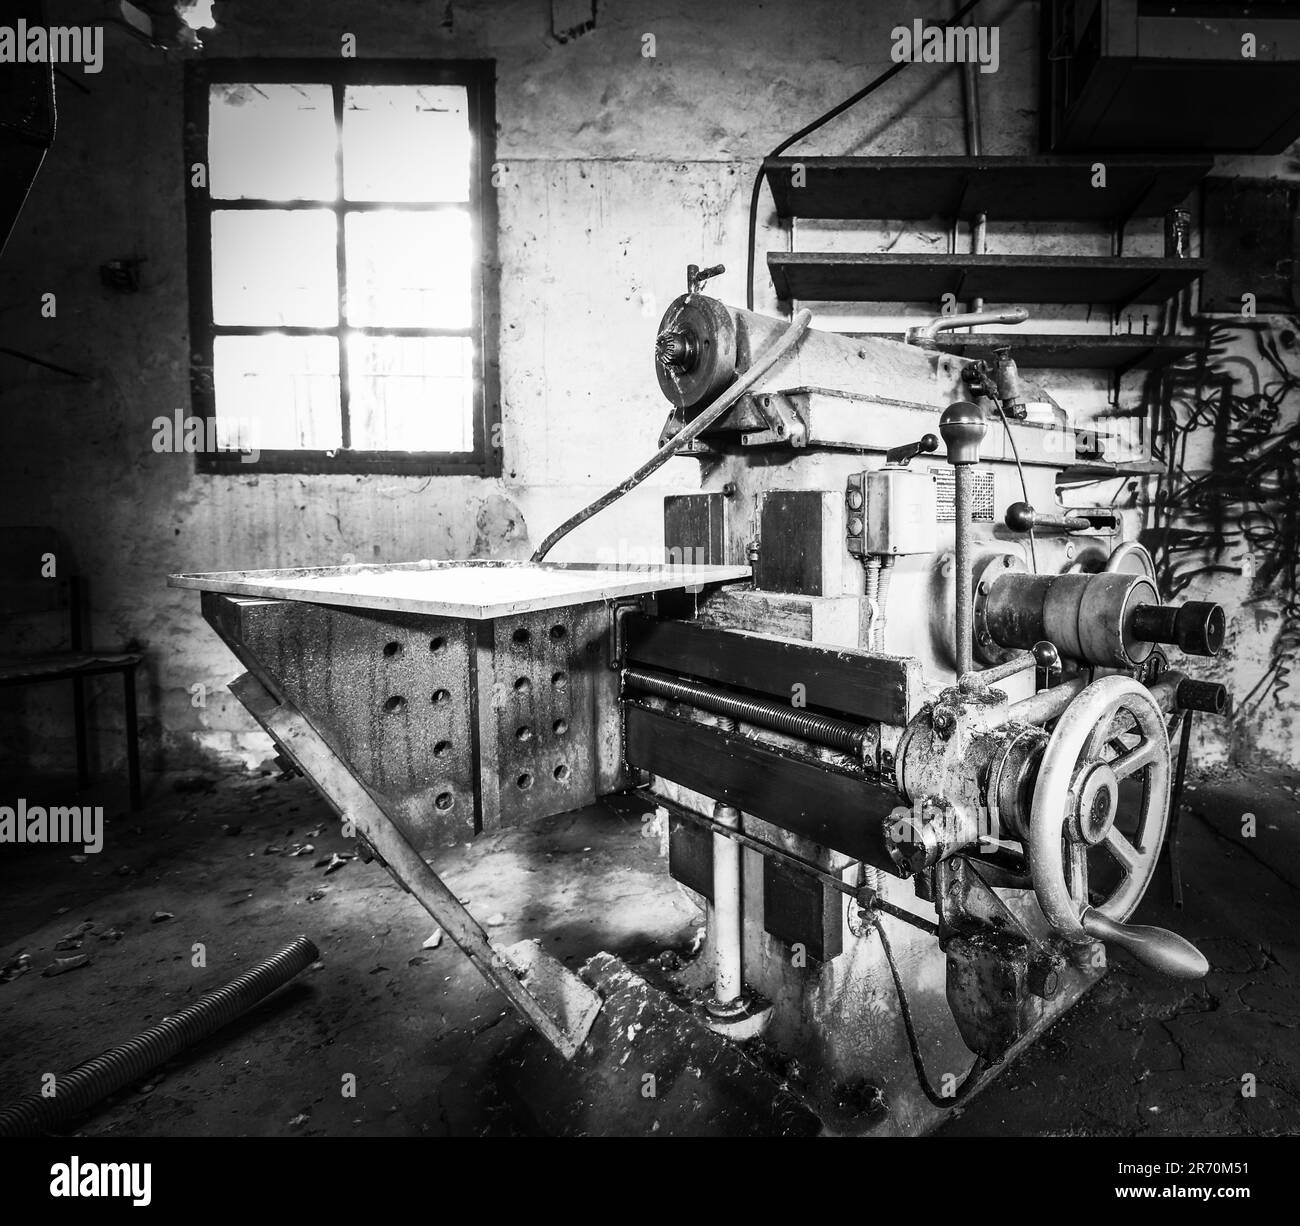 aged machinery in an industrial plant Stock Photo